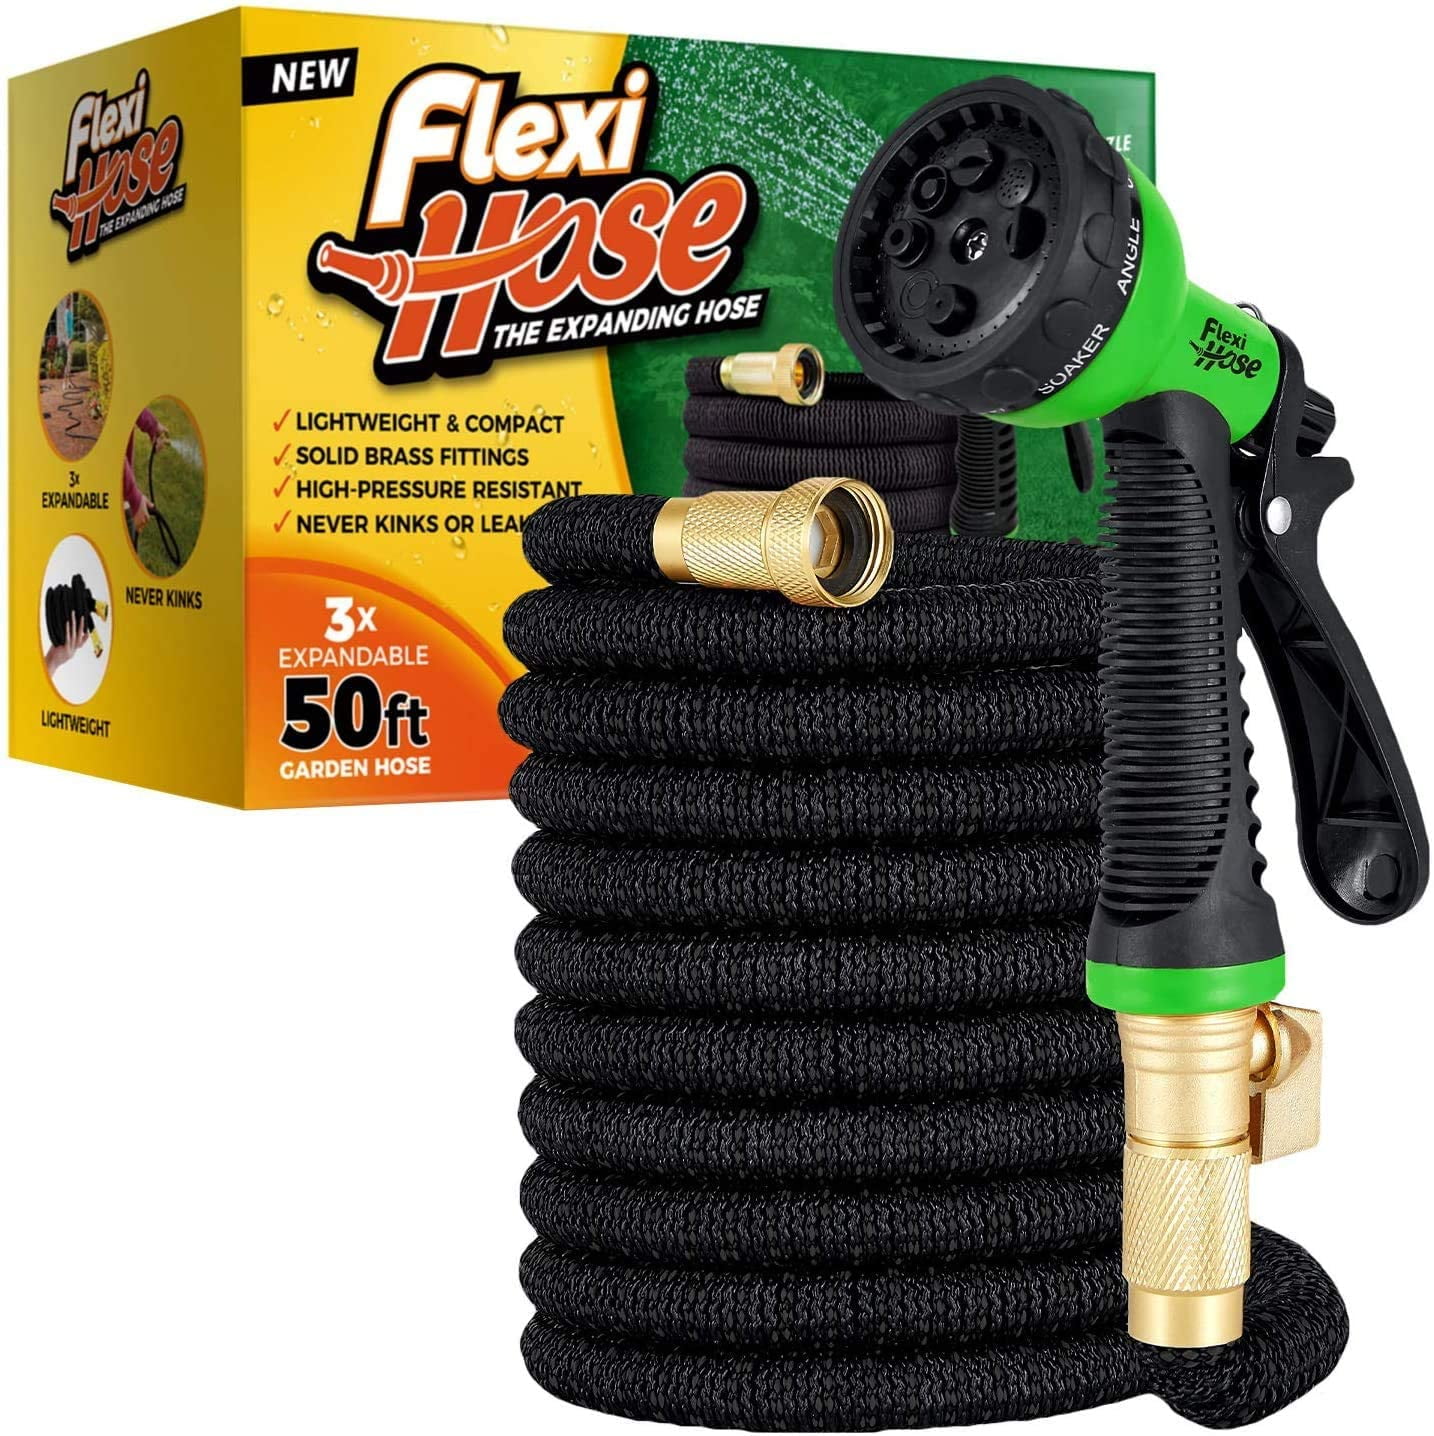 Double Latex & Lightweight 3/4 Solid Fittings and 6 Function High Pressure Spray Nozzle with Storage Bag Retractable Free Water Hoses 2021 Model Flexible 50ft Expandable Garden Hose 